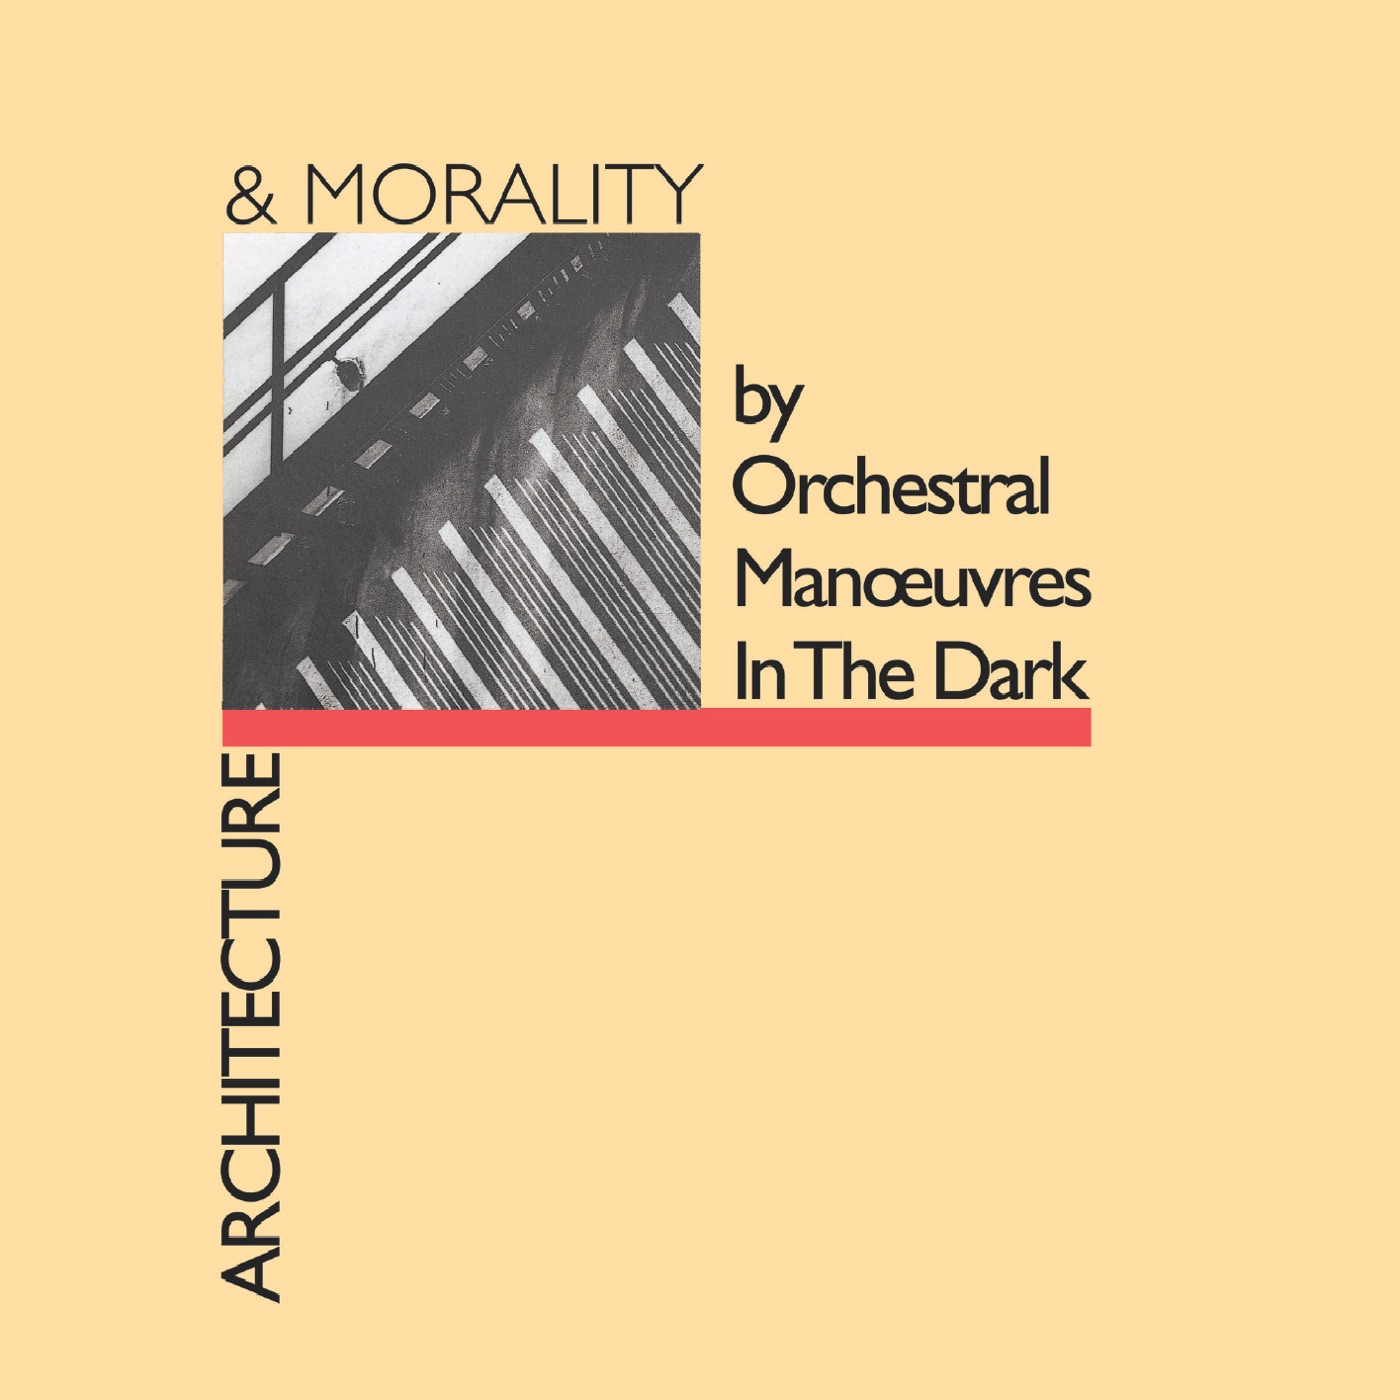 Architecture And Morality by Orchestral Manoeuvres in the Dark